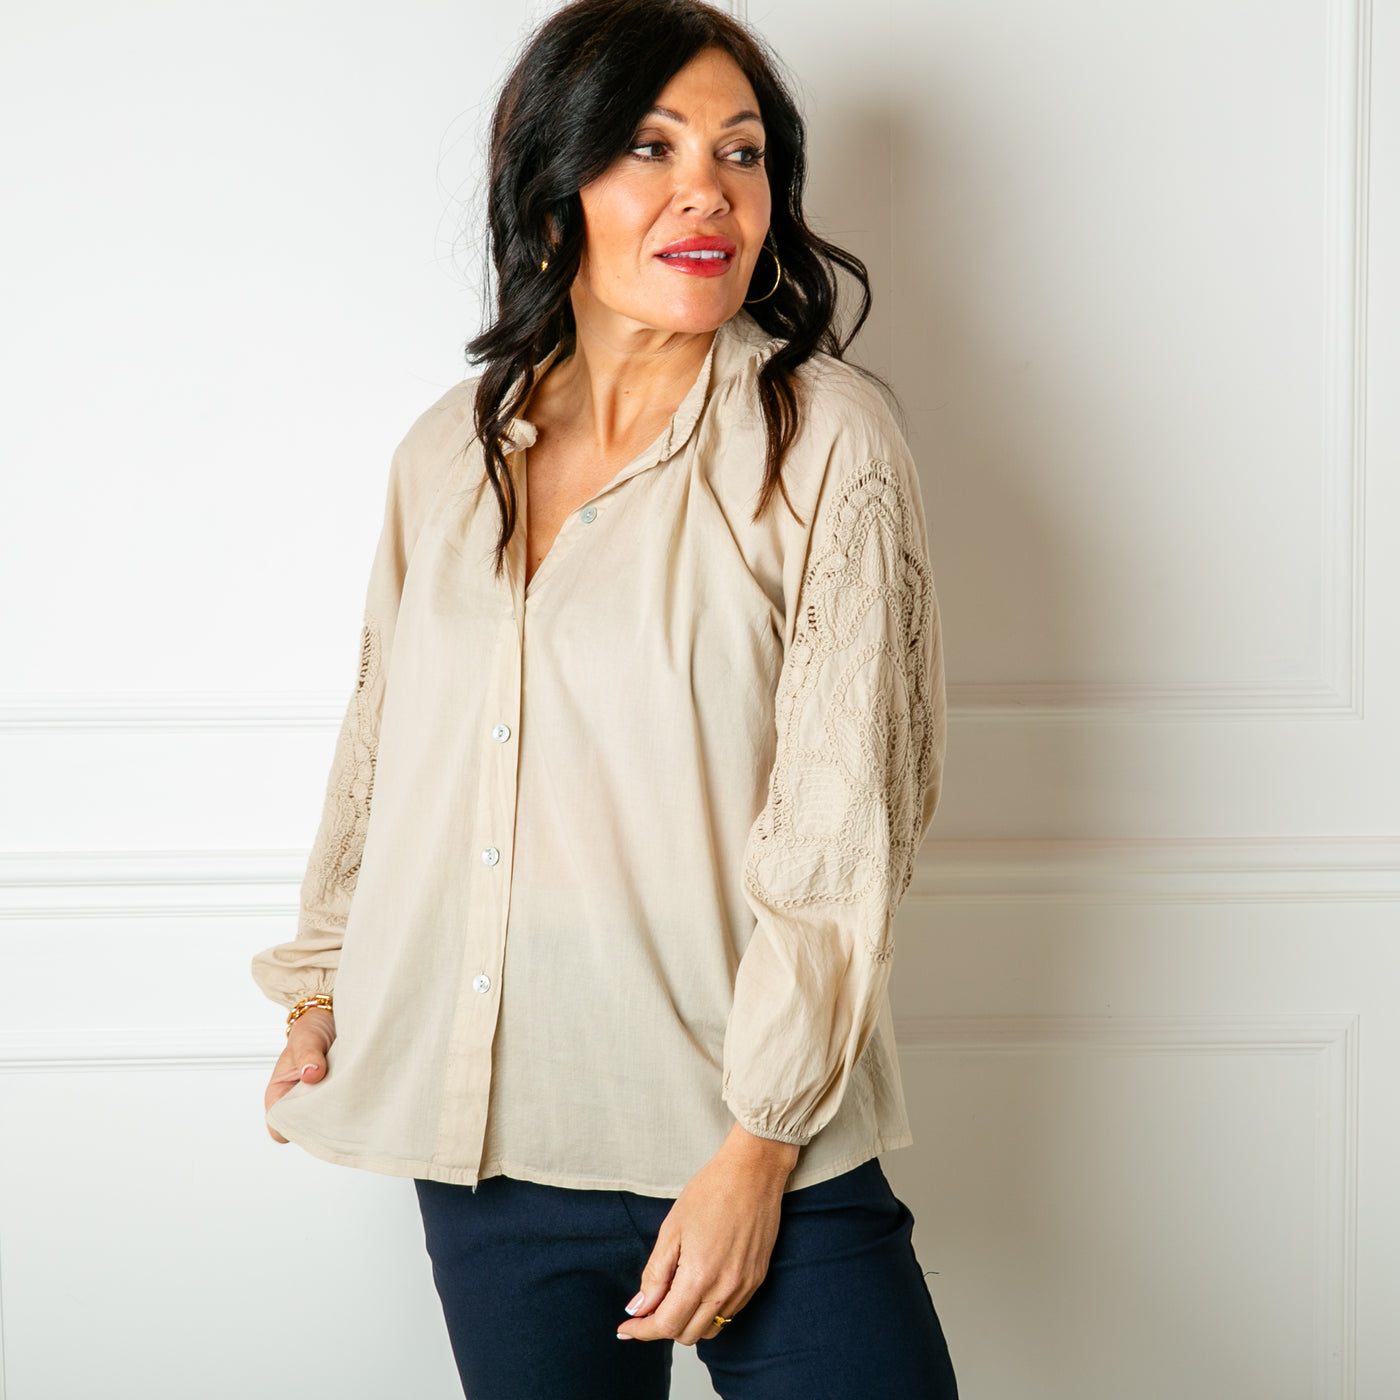 The Balloon Sleeve Shirt in stone cream with long sleeves featuring beautiful broderie embroidery detailing